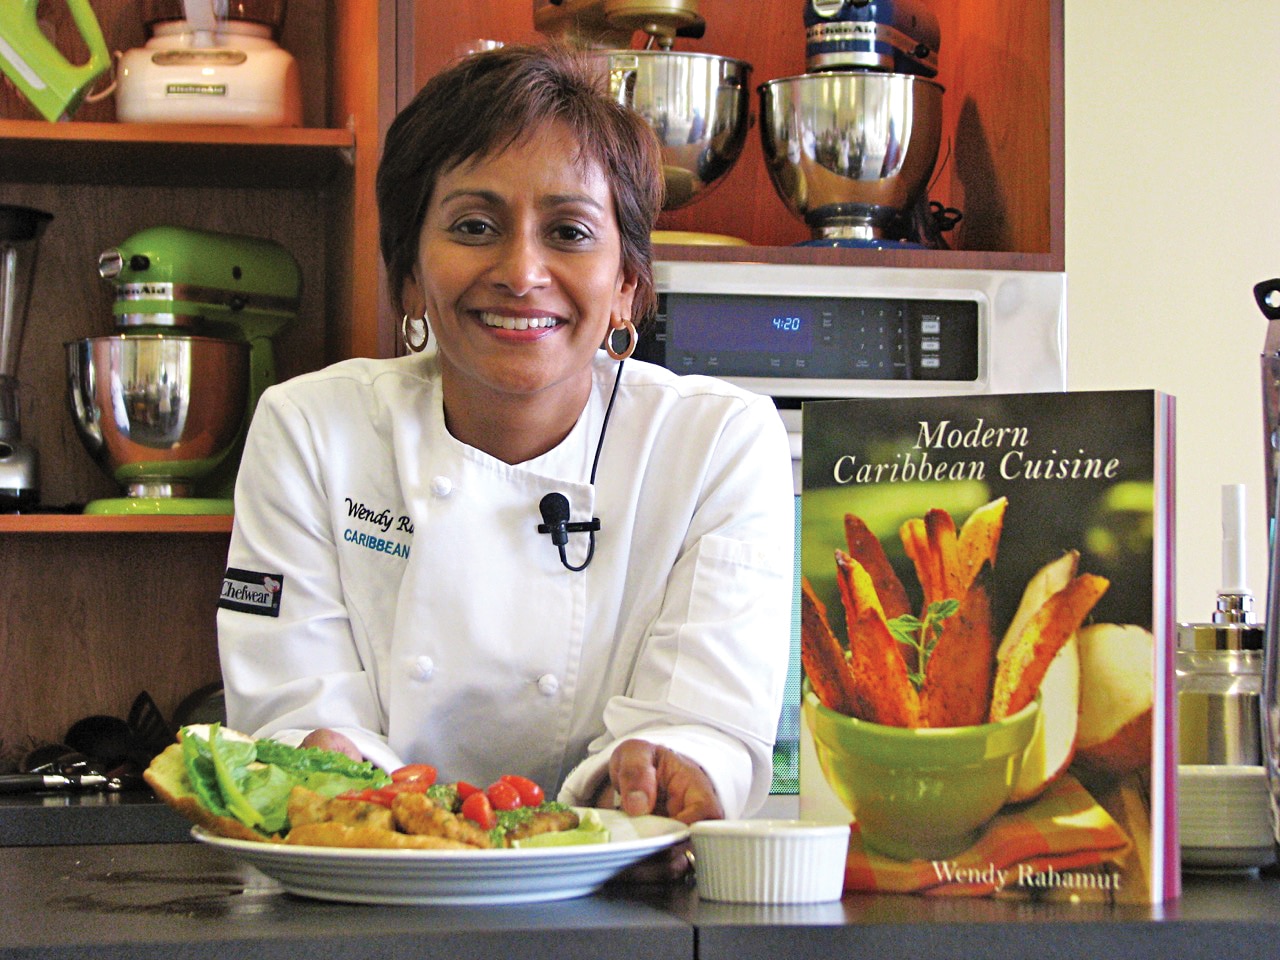 Cooking Classes to Make Caribbean Food: Wendy Rahamut School of Cooking